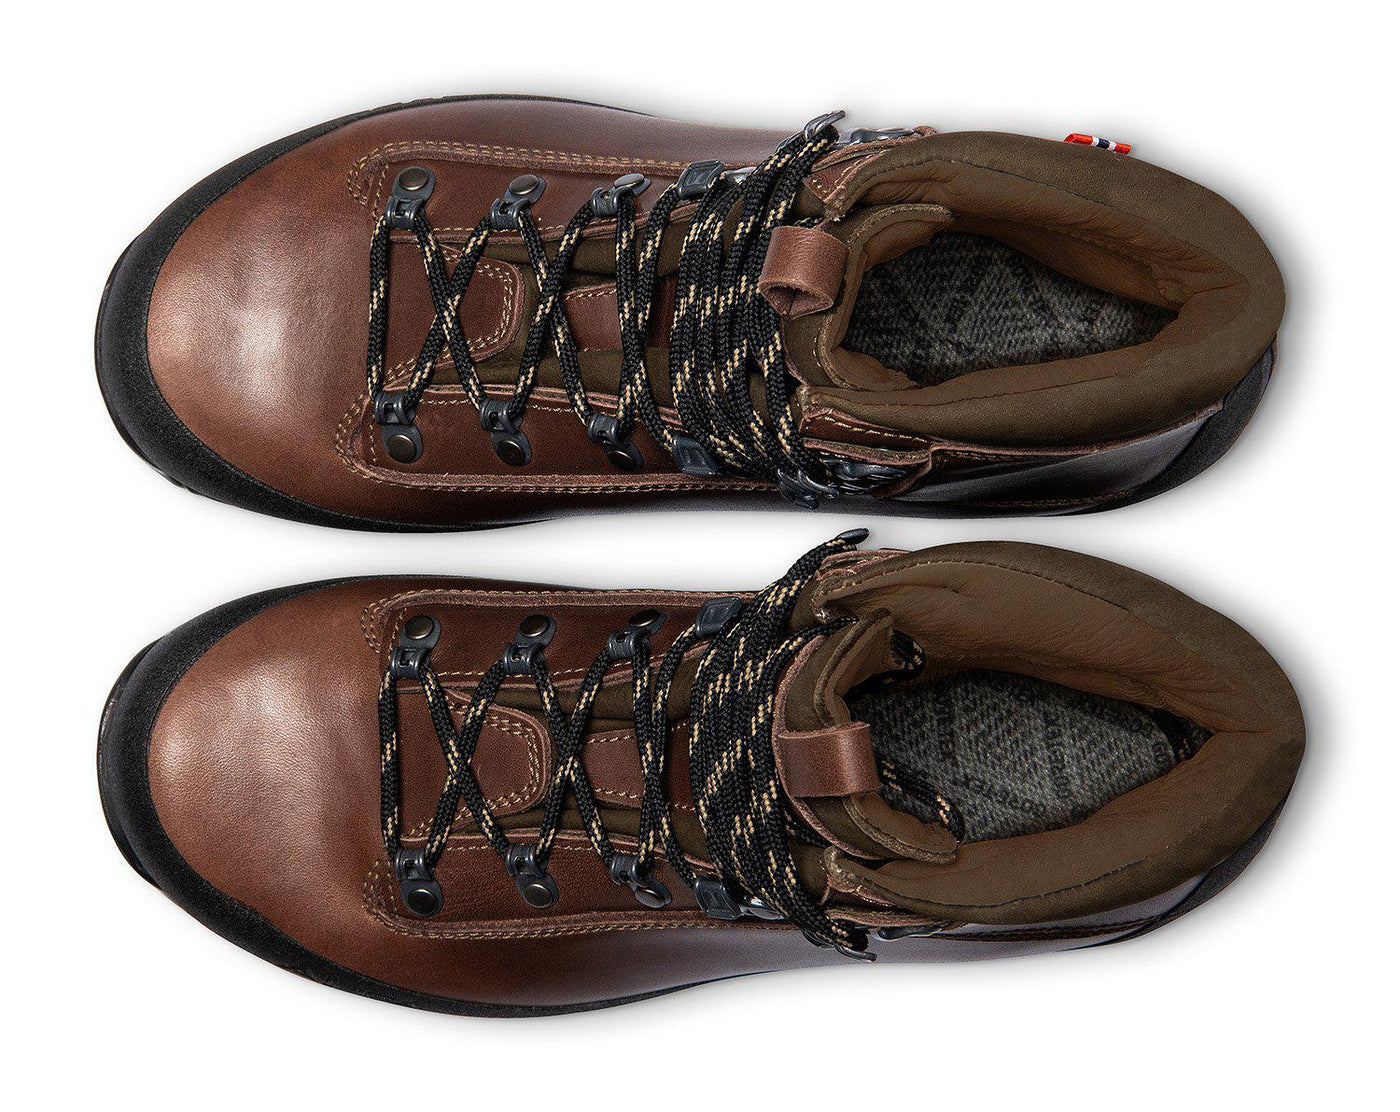 5835402220-impact_aps_gtx_w-classic_brown-above